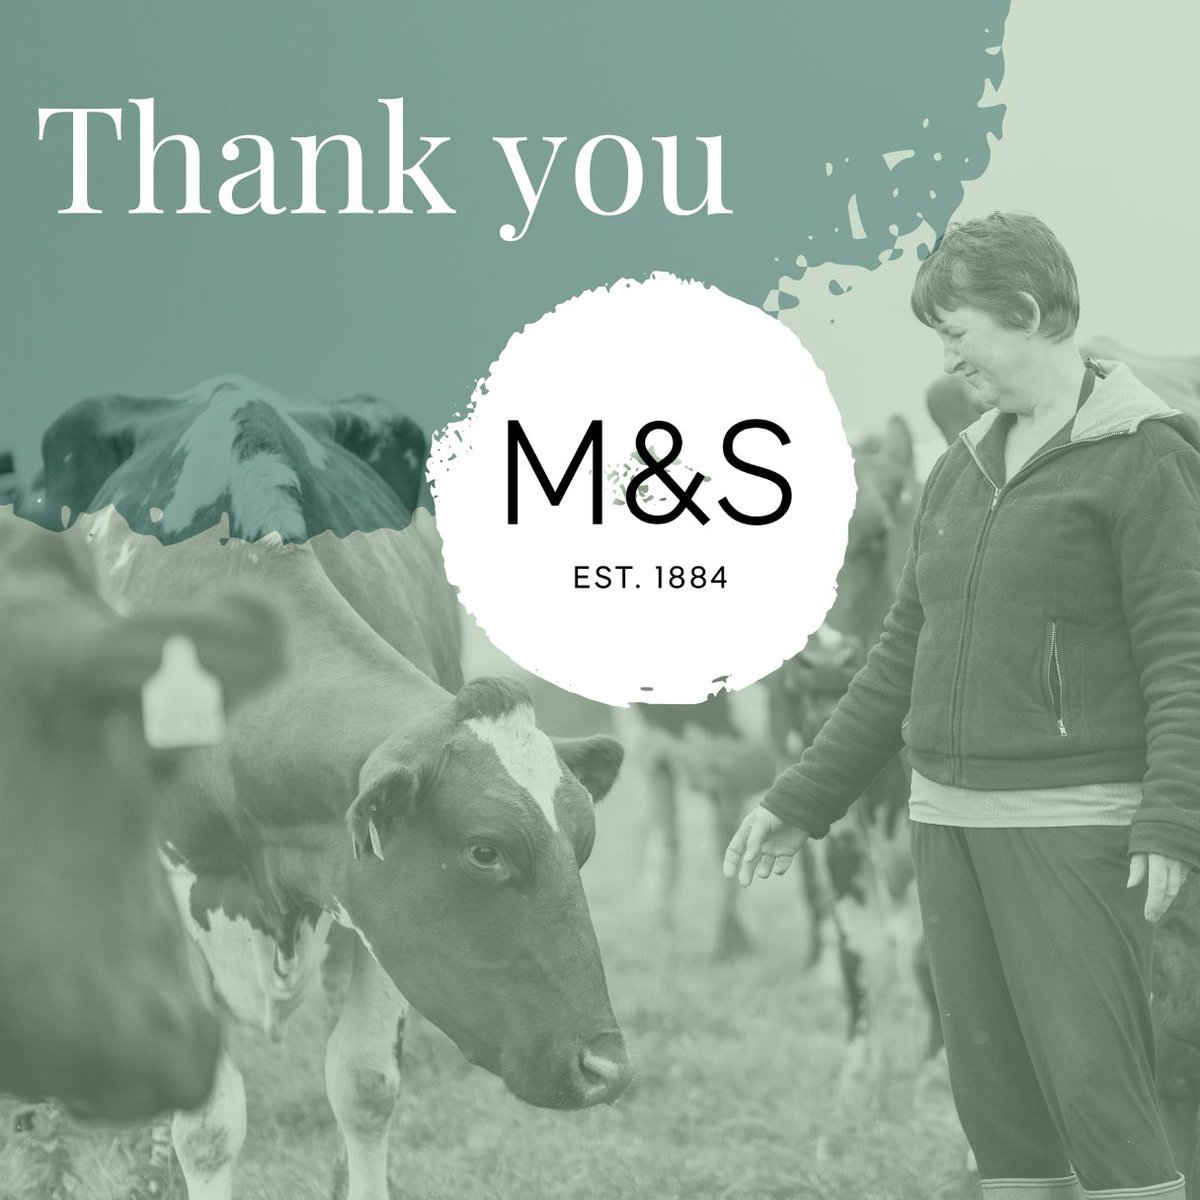 We’re incredibly grateful for @marksandspencer’s generous donation to the charity. For nine years, their support has enabled us to support family farms and rural communities across the UK. Learn more about our corporate partners and donors here:royalcountrysidefund.org.uk/support-us/our…